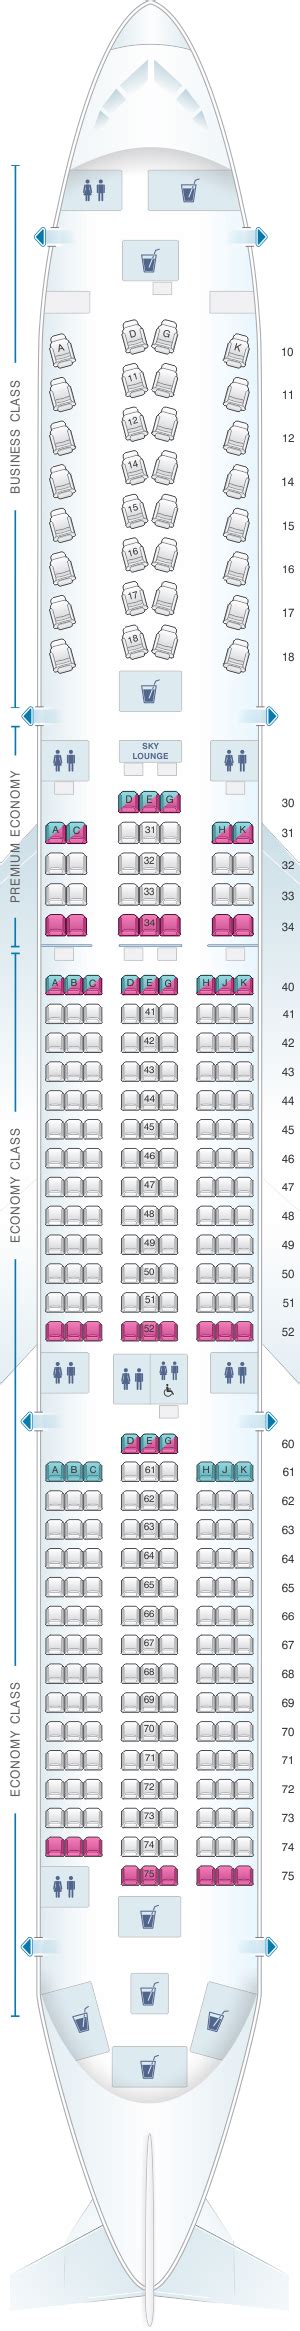 A350 1000 Seating Charts